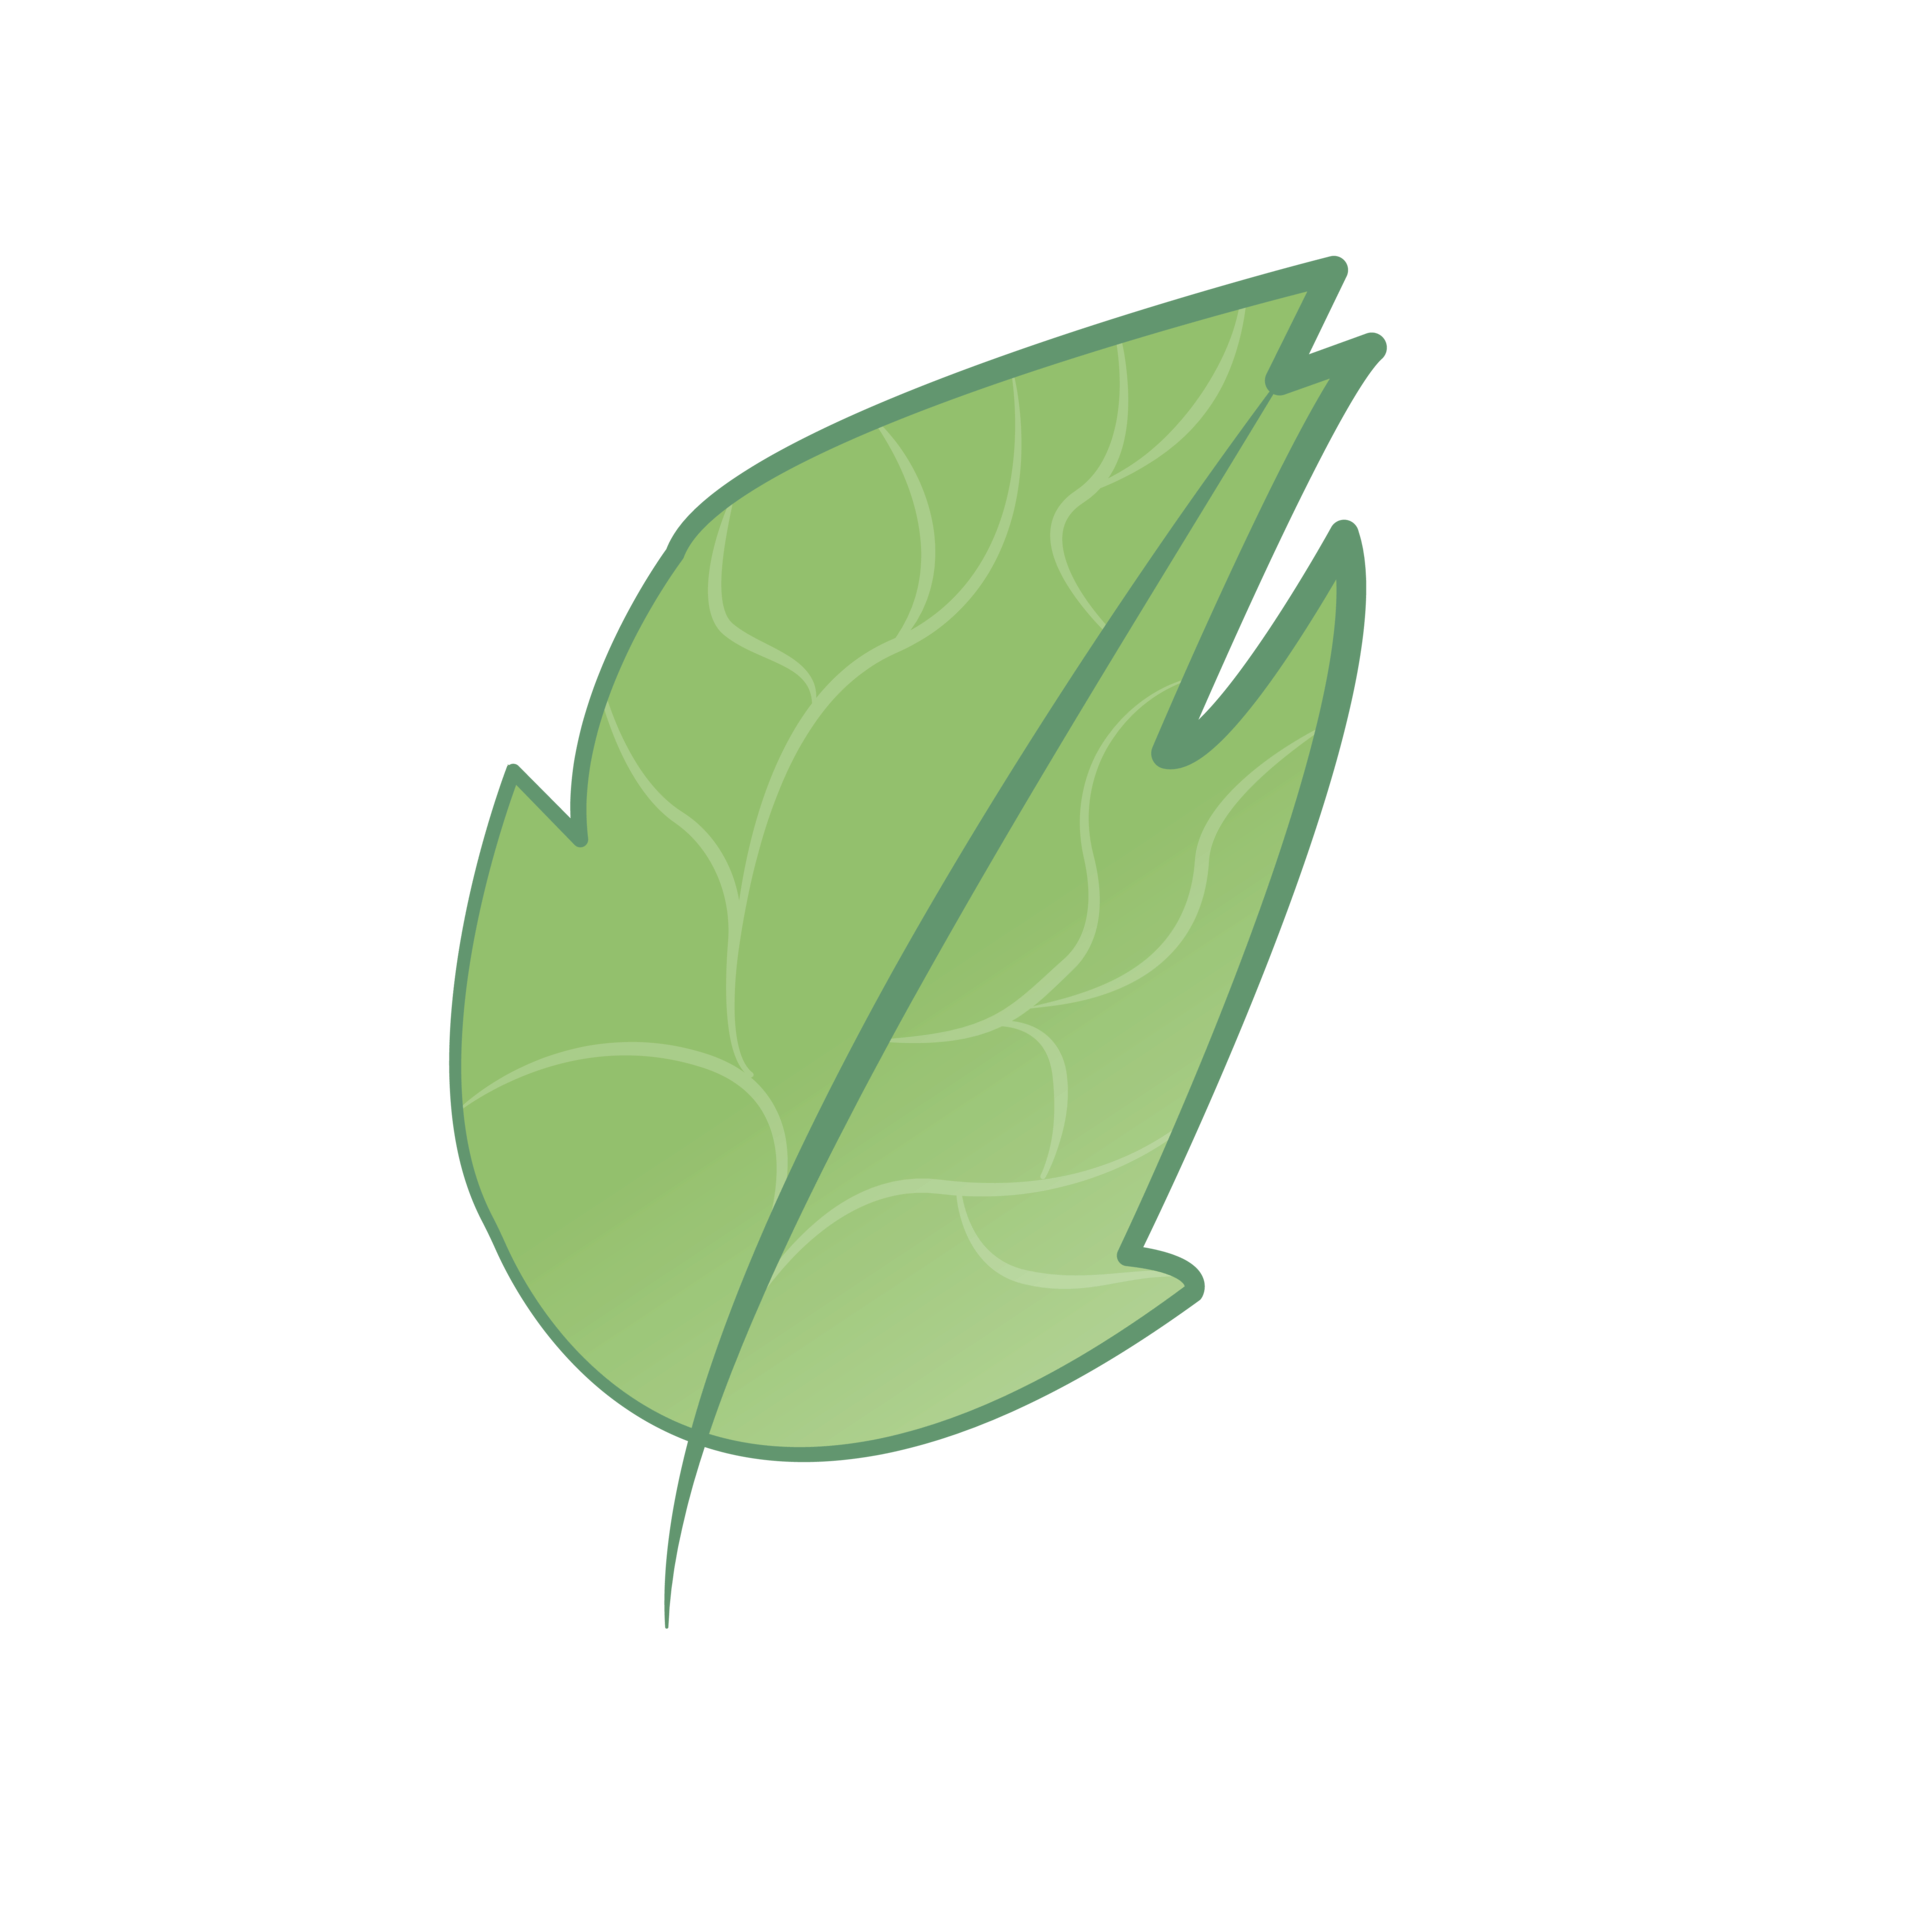 Image of a graphic Element of an full colour green leaf tied to the Atikameksheng Trust brand